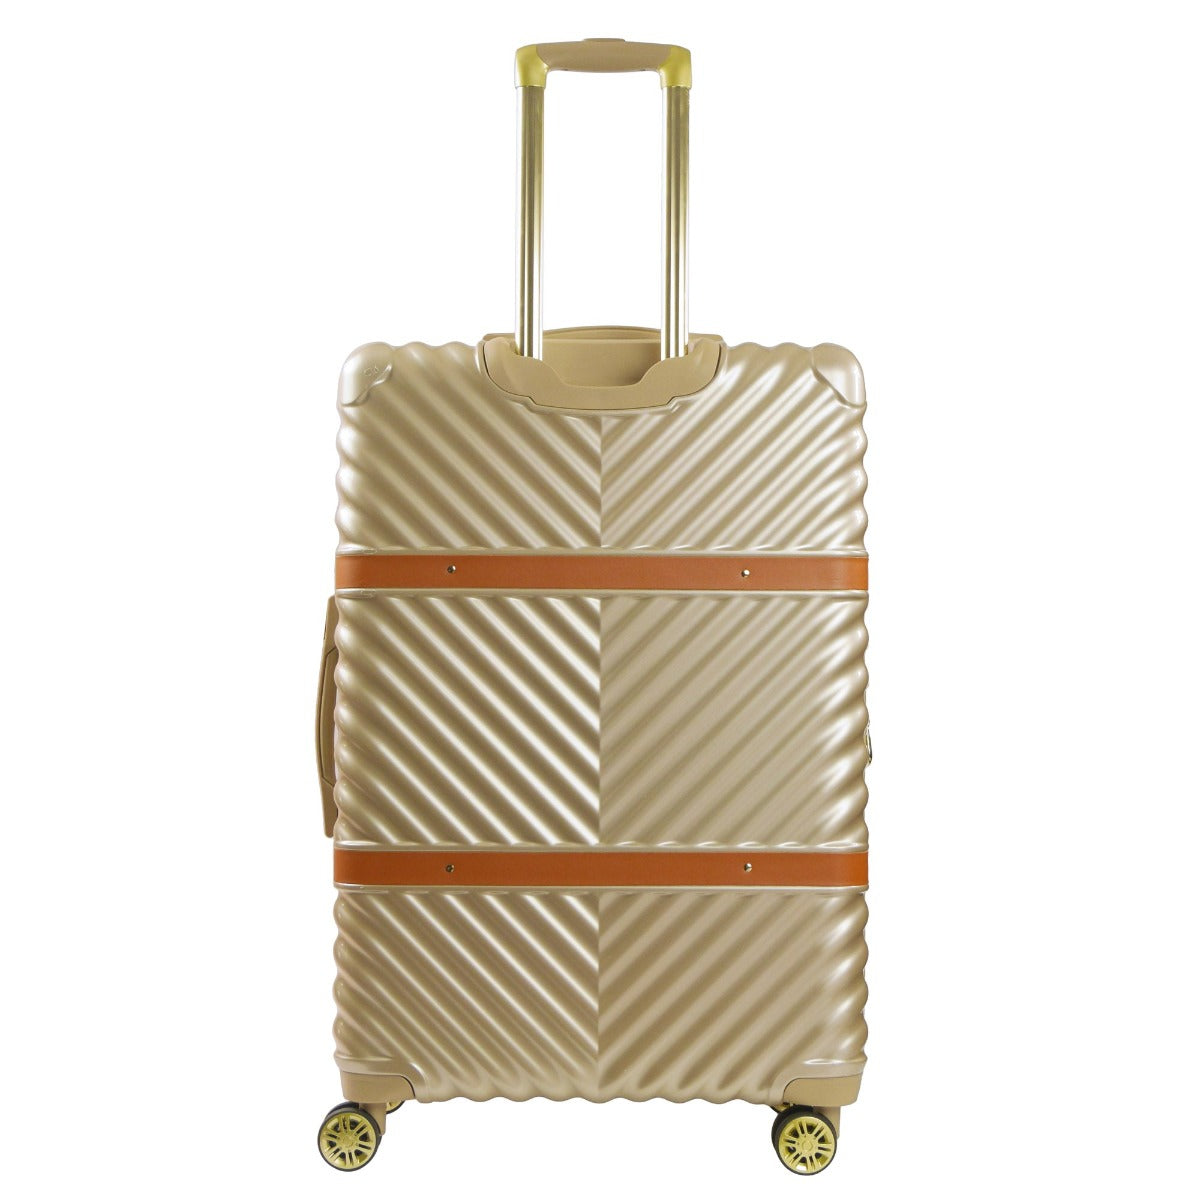 Christian Siriano New York Stella 29 inch hardside spinner suitcase taupe - best durable checked luggage